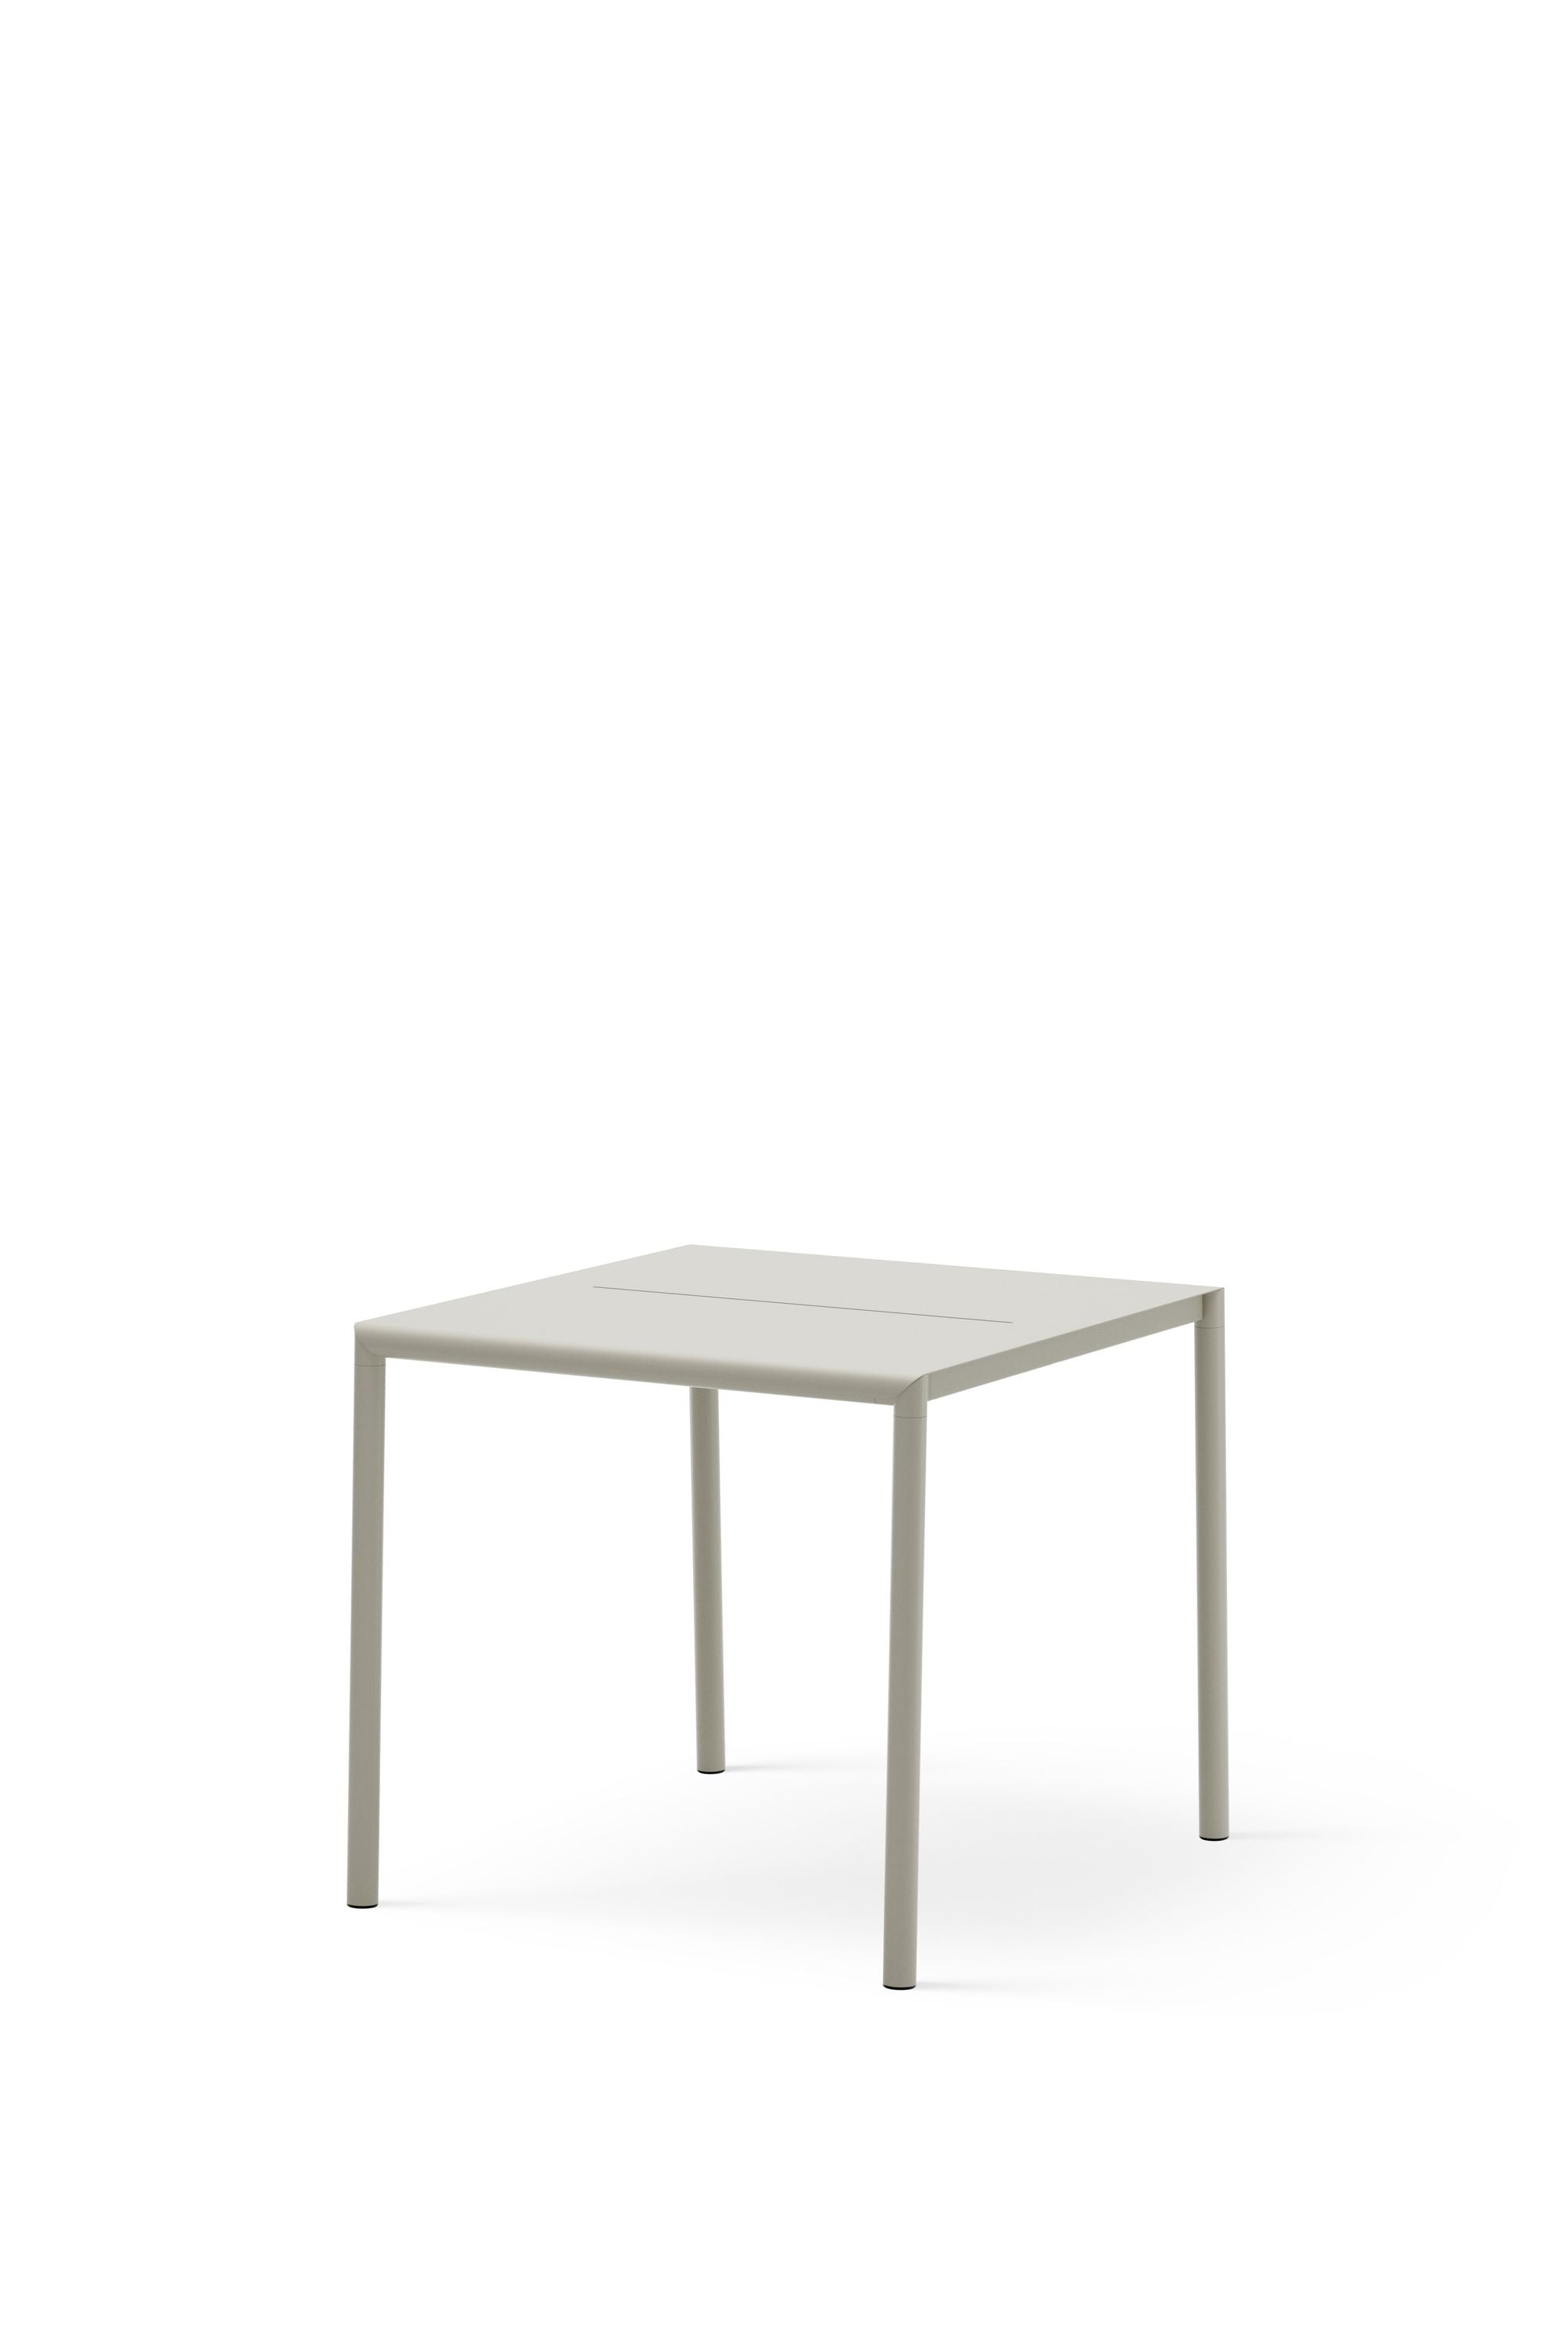 New Works May Table 85 Cm, Light Grey